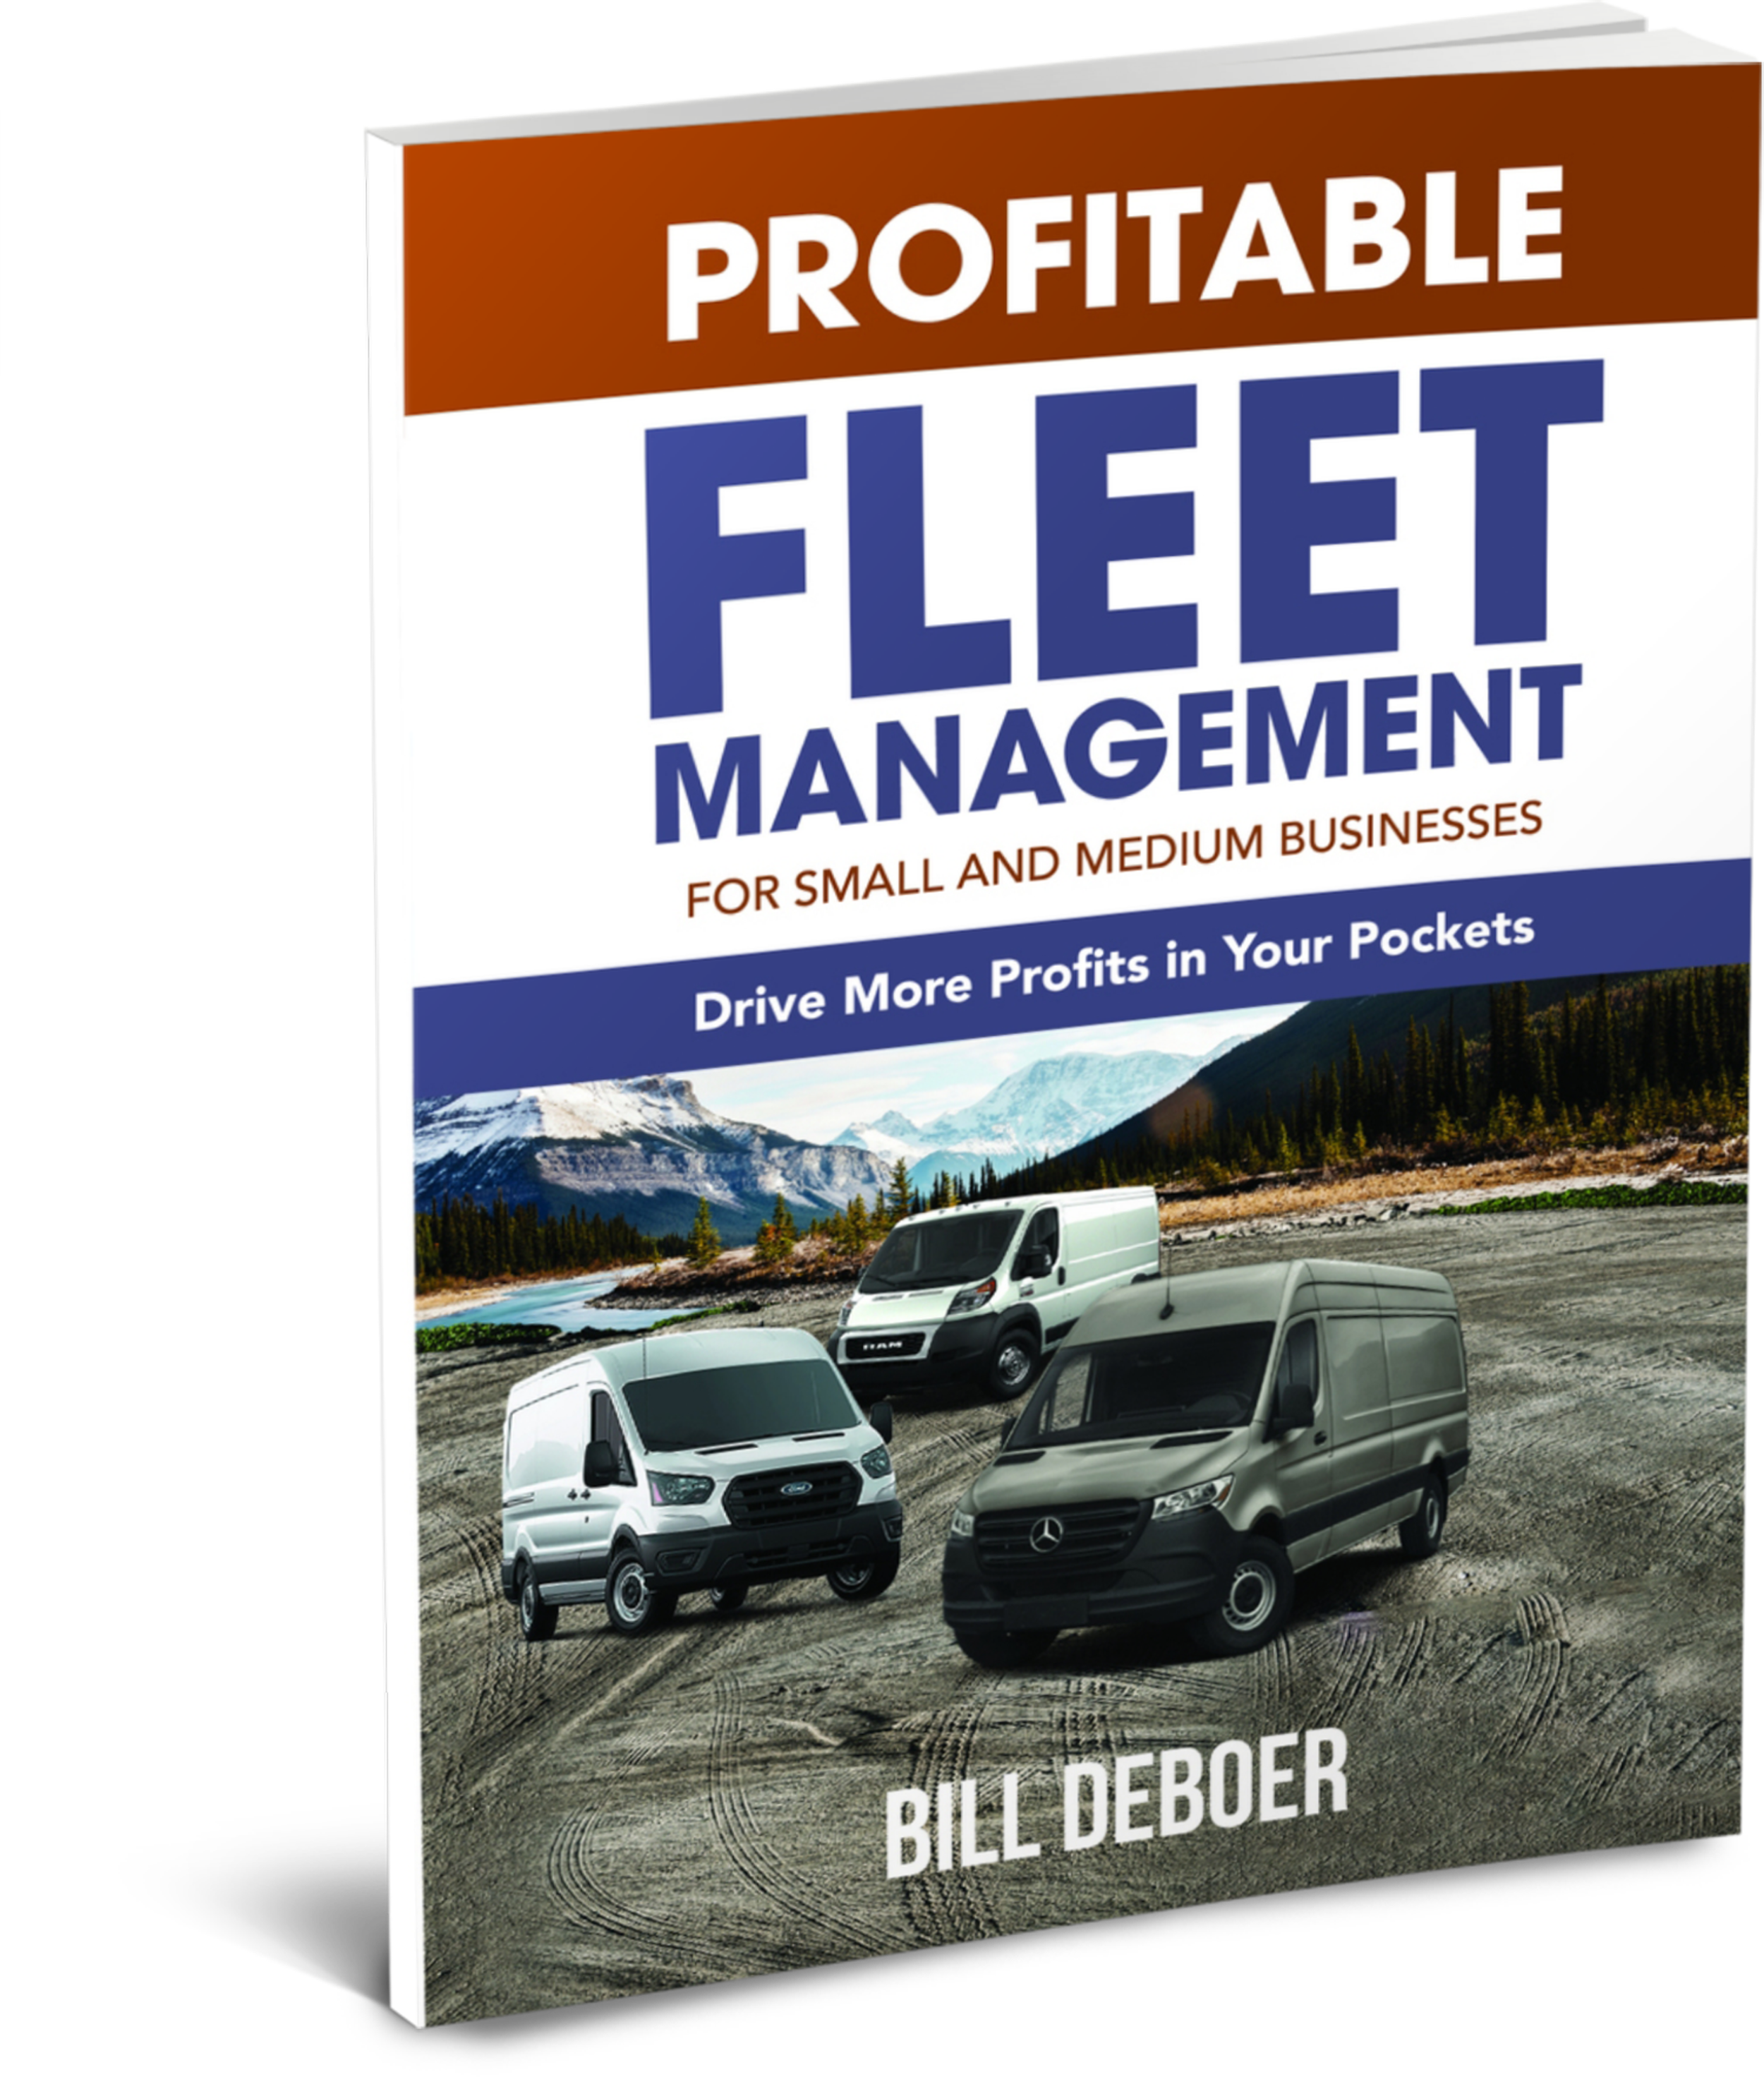  Profitable Fleet Managment  Bill helps small and medium size companies manage their fleet of vehicles to ensure they continue to serve the business needs and proactively stay in service.   Listen as Bill shares his value-driven approach    Connect w